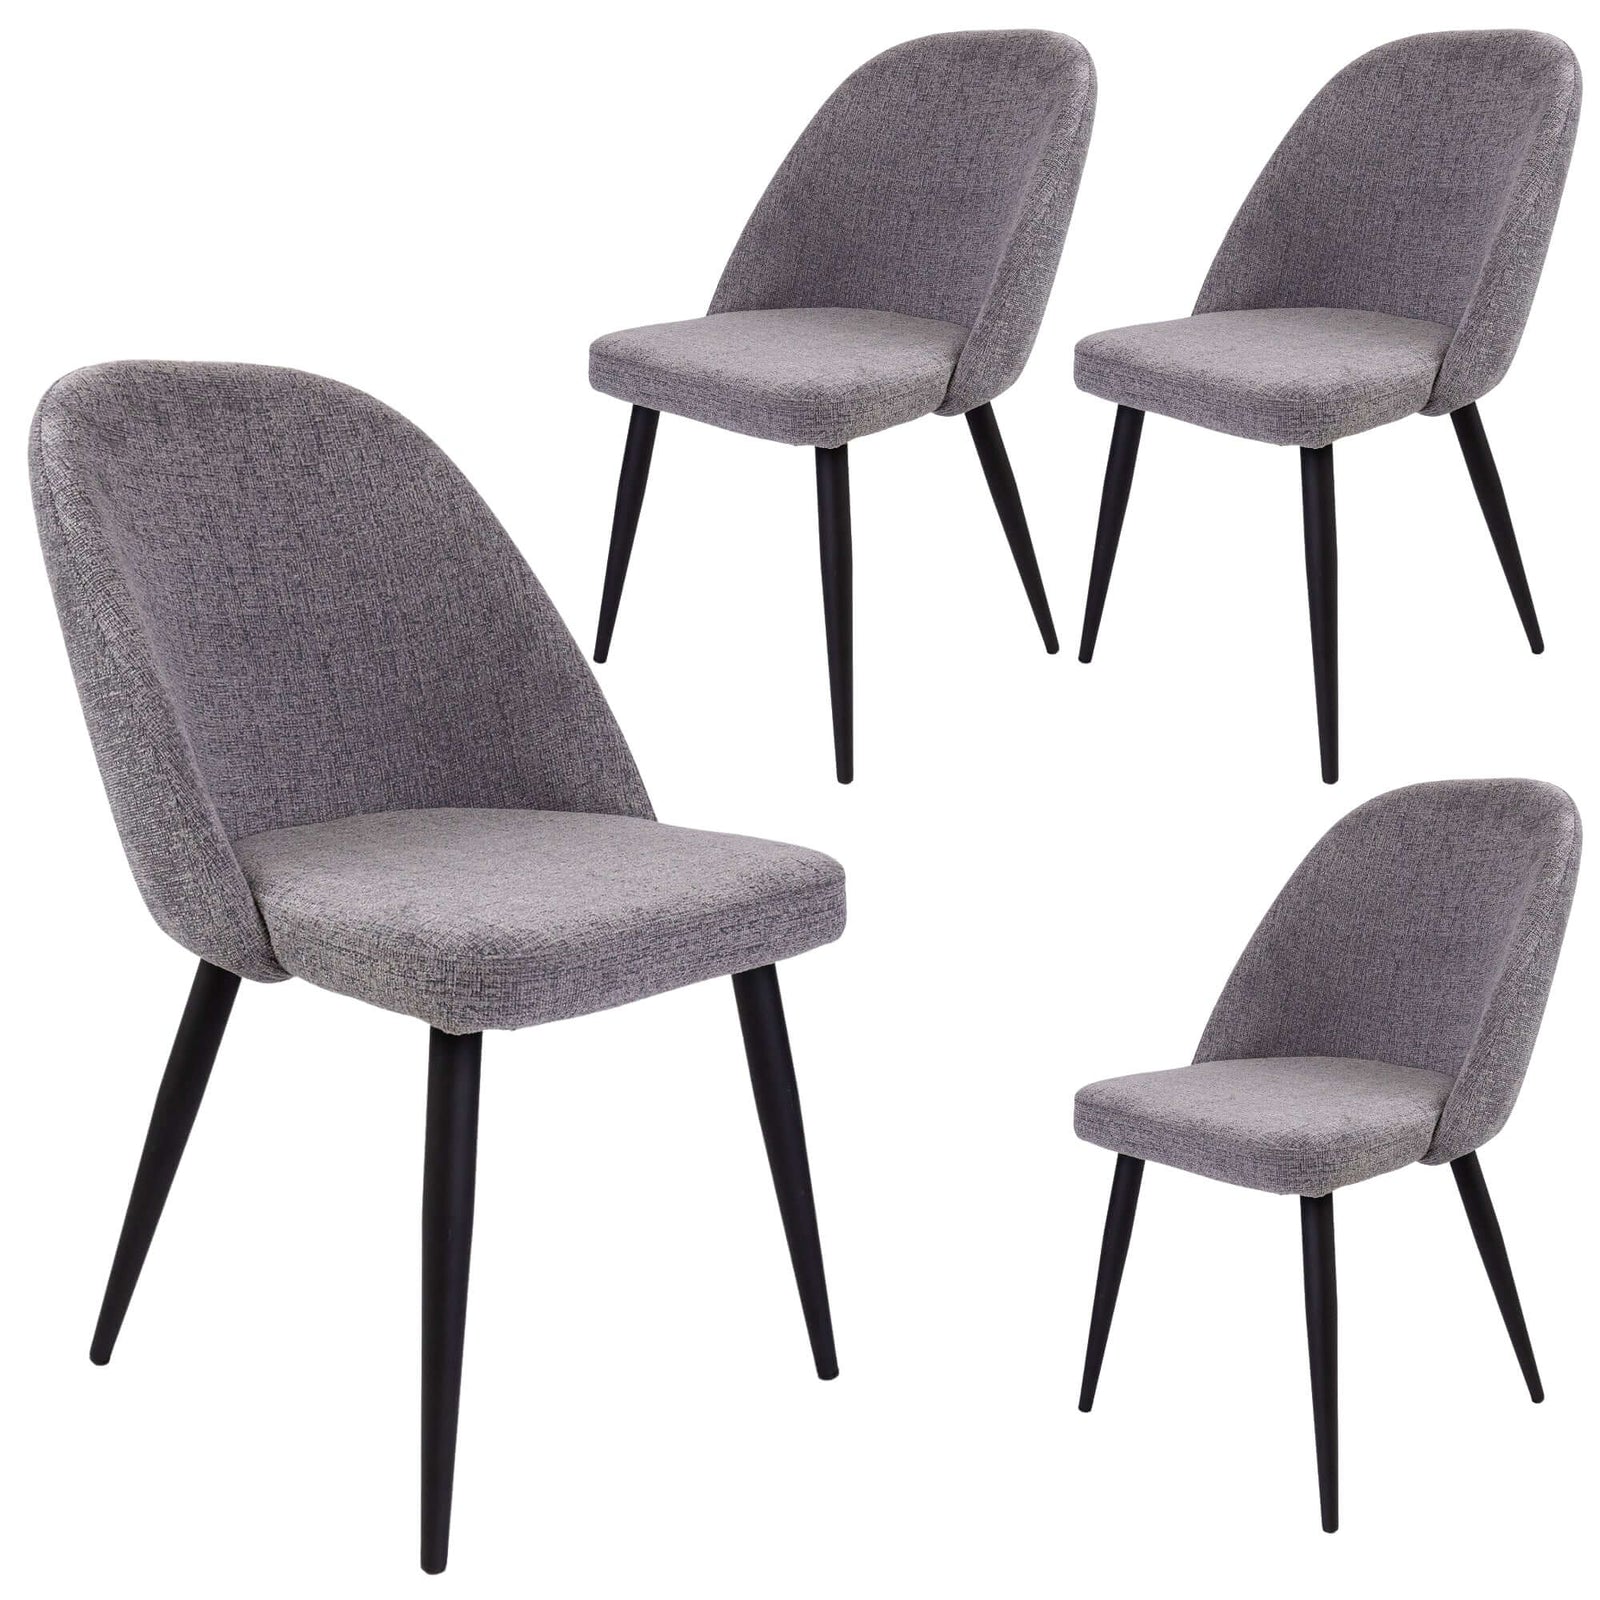 Erin Dining Chair Set of 4 Fabric Seat with Metal Frame - Fog-Upinteriors